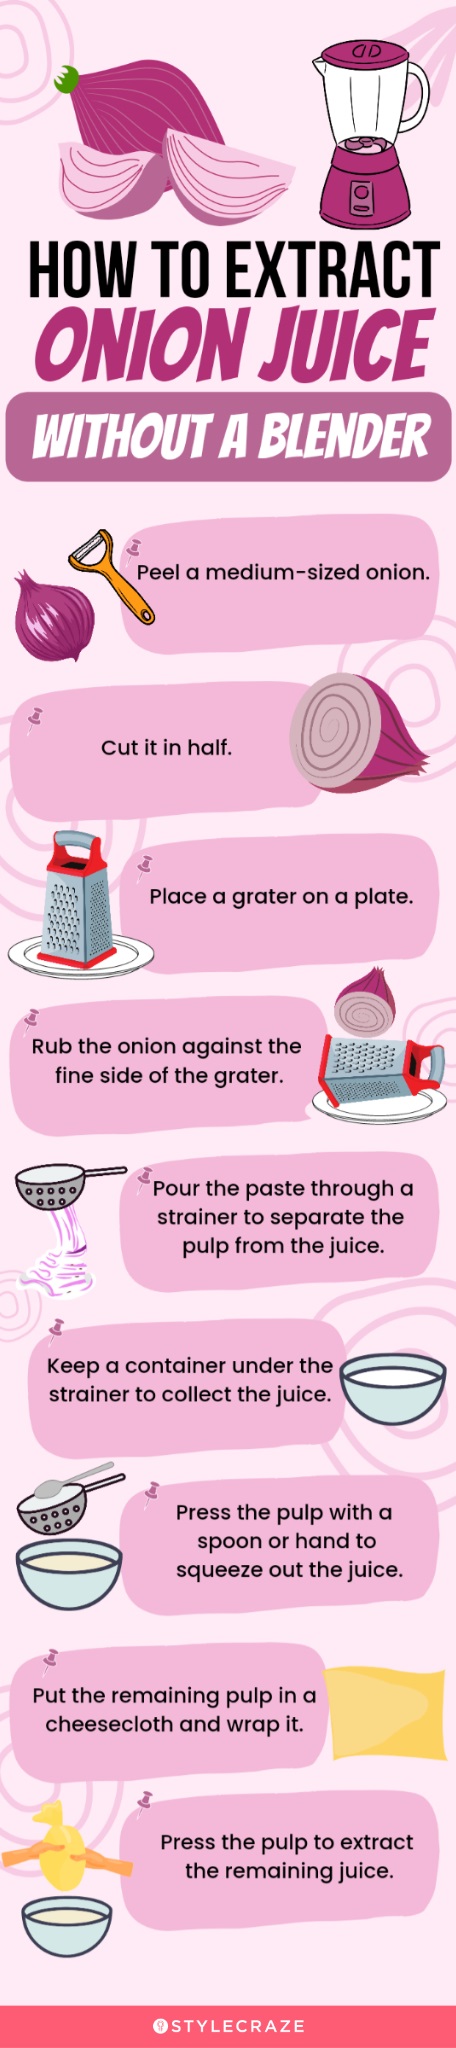 how to extract onion juice without a blender (infographic)